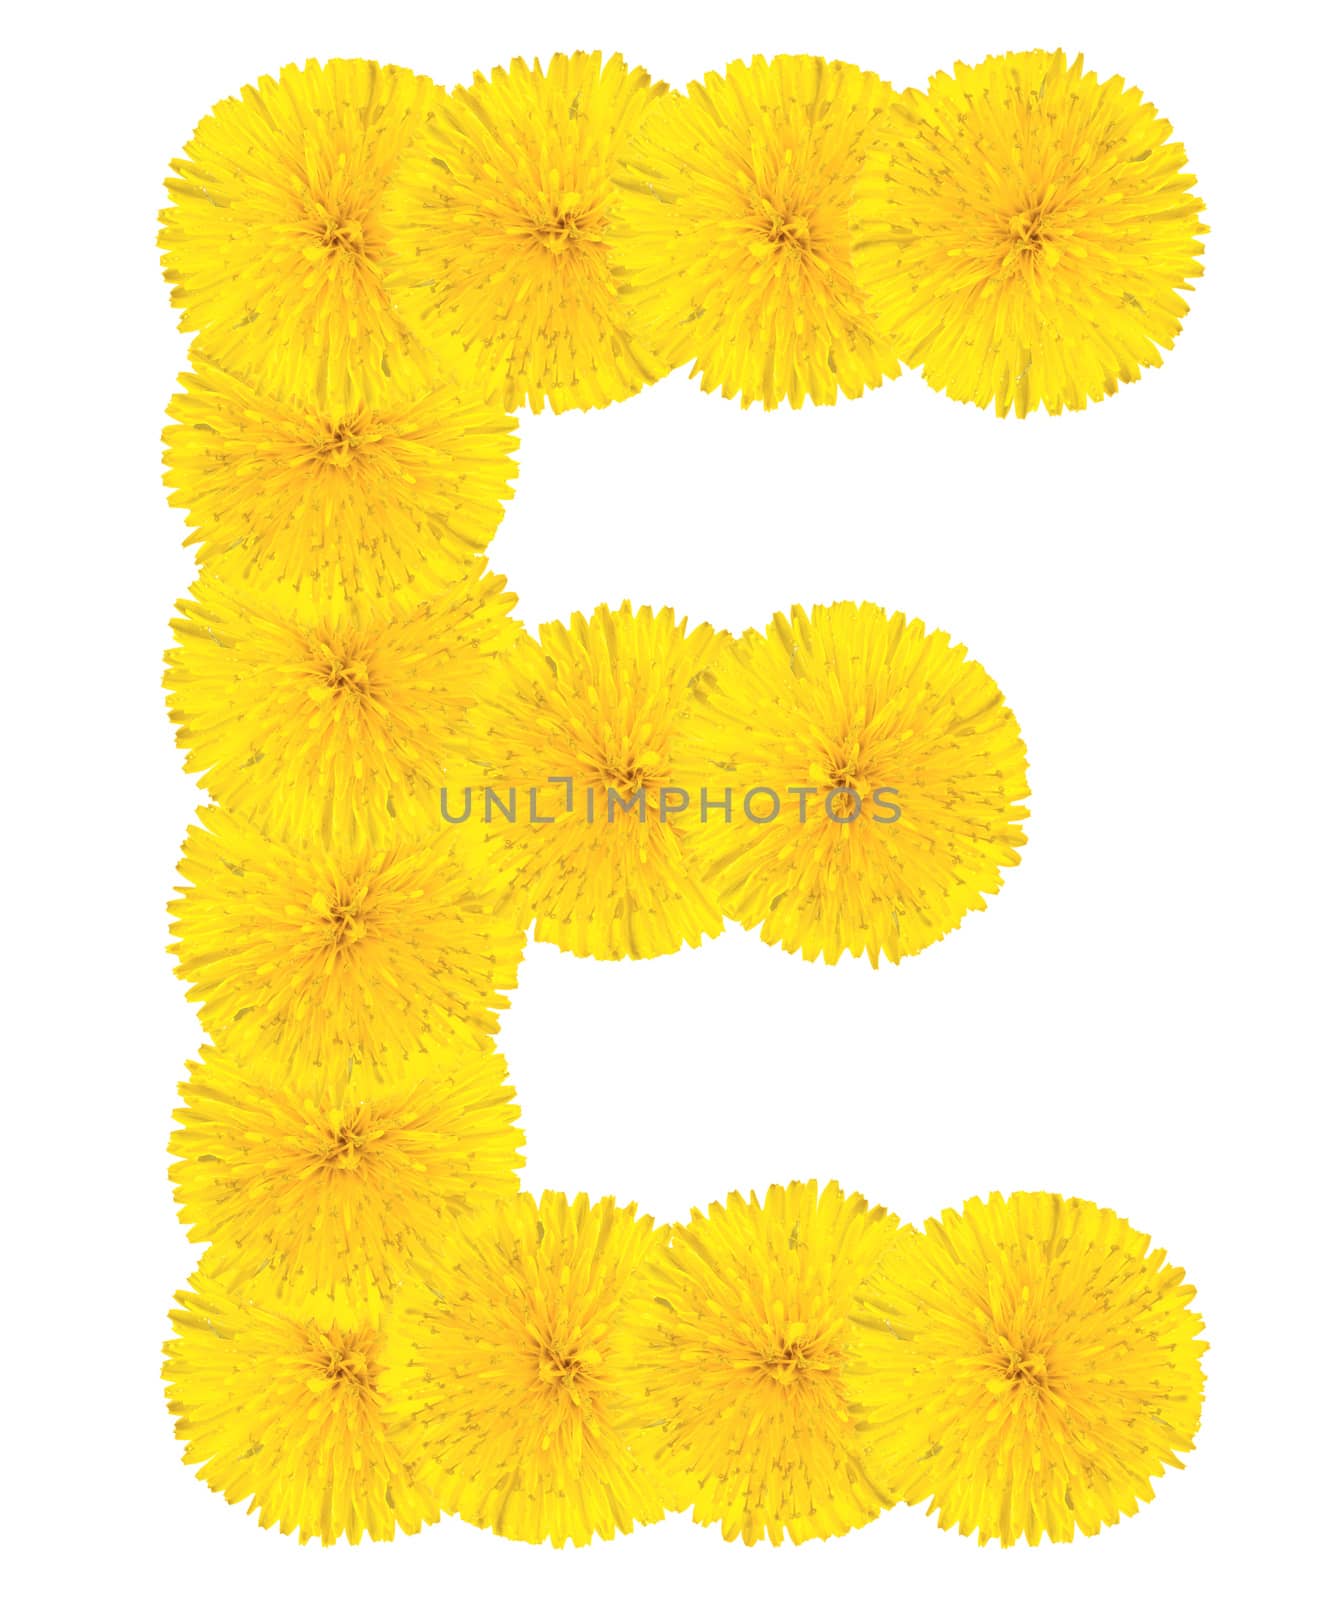 Letter E made from dandelion flowers isolated on white background